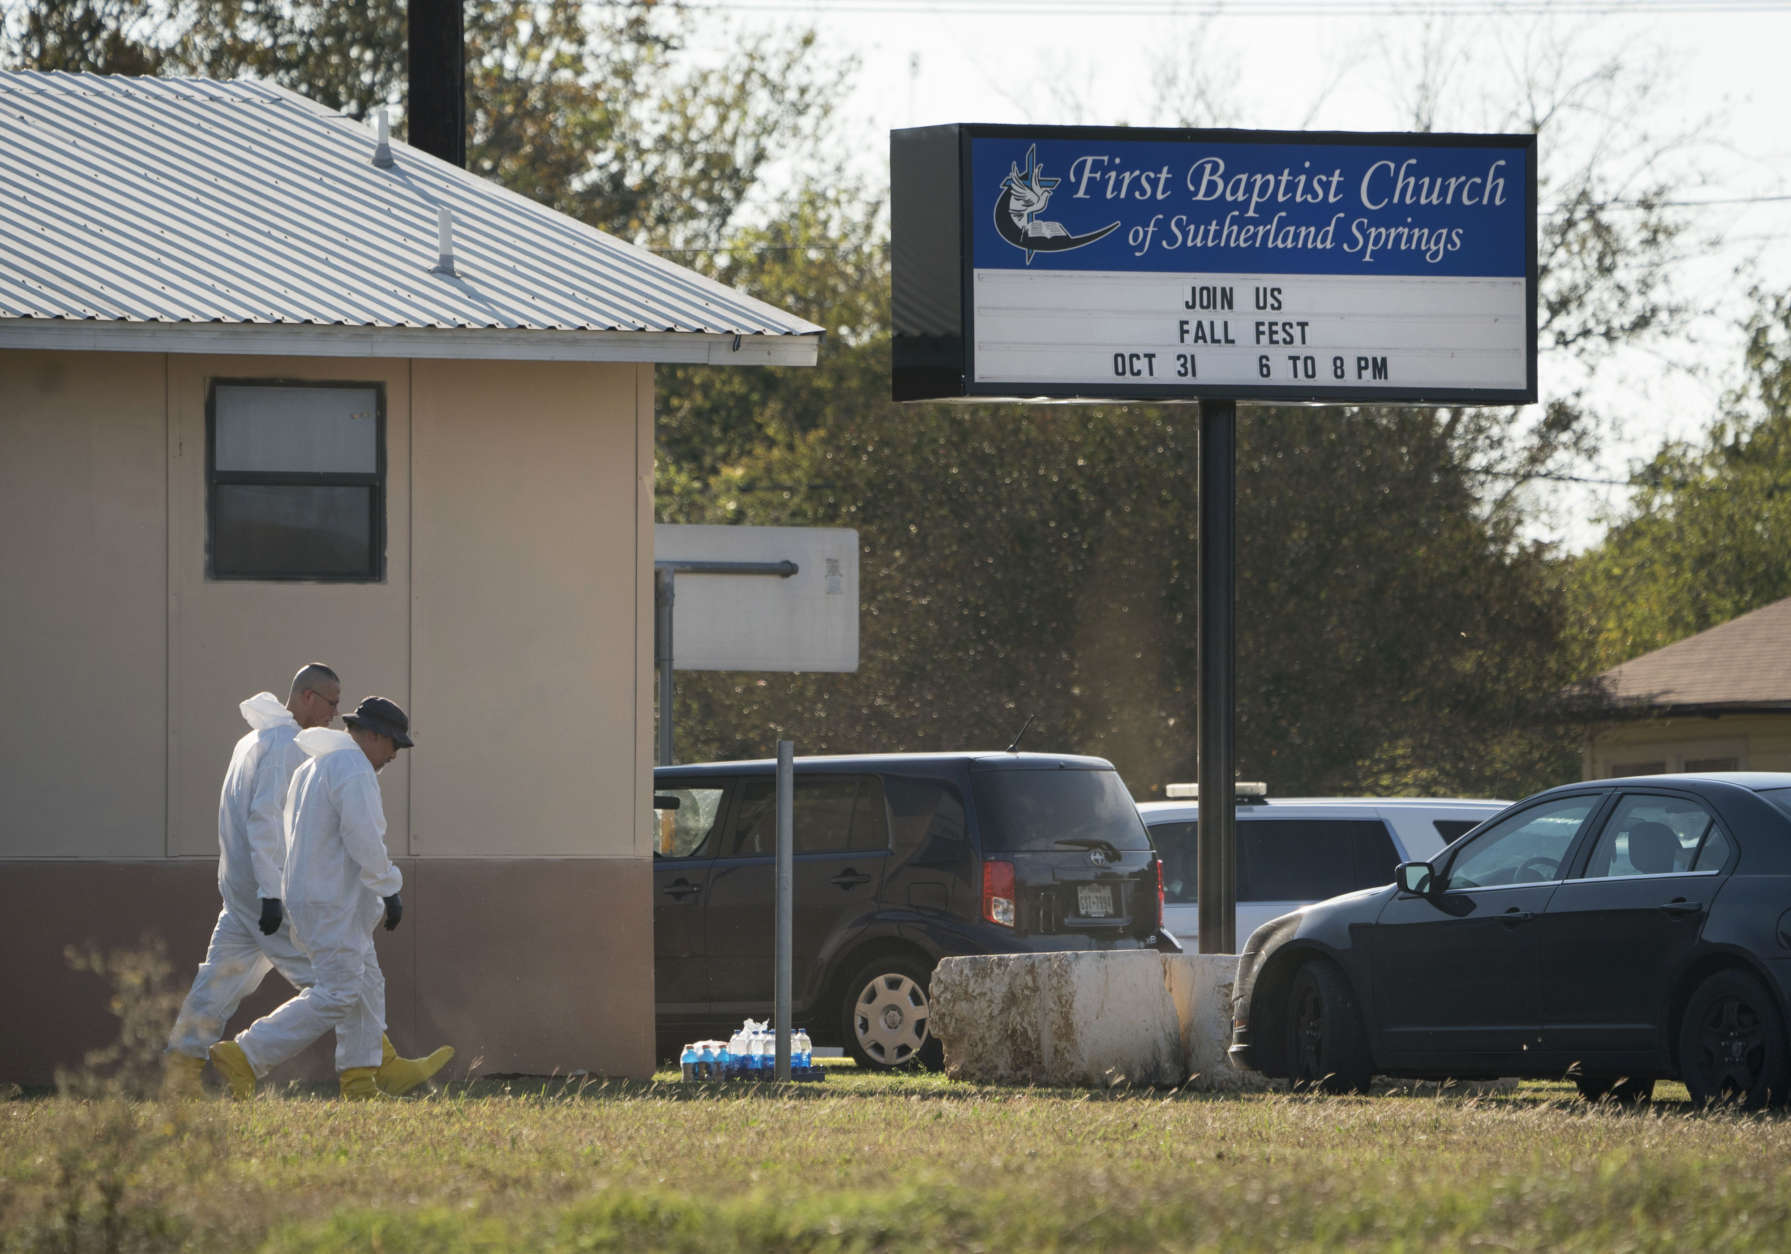 Members of the FBI walk next to the First Baptist Church of Sutherland Springs after a fatal shooting, Sunday, Nov. 5, 2017, in Sutherland Springs, Texas. (AP Photo/Darren Abate)